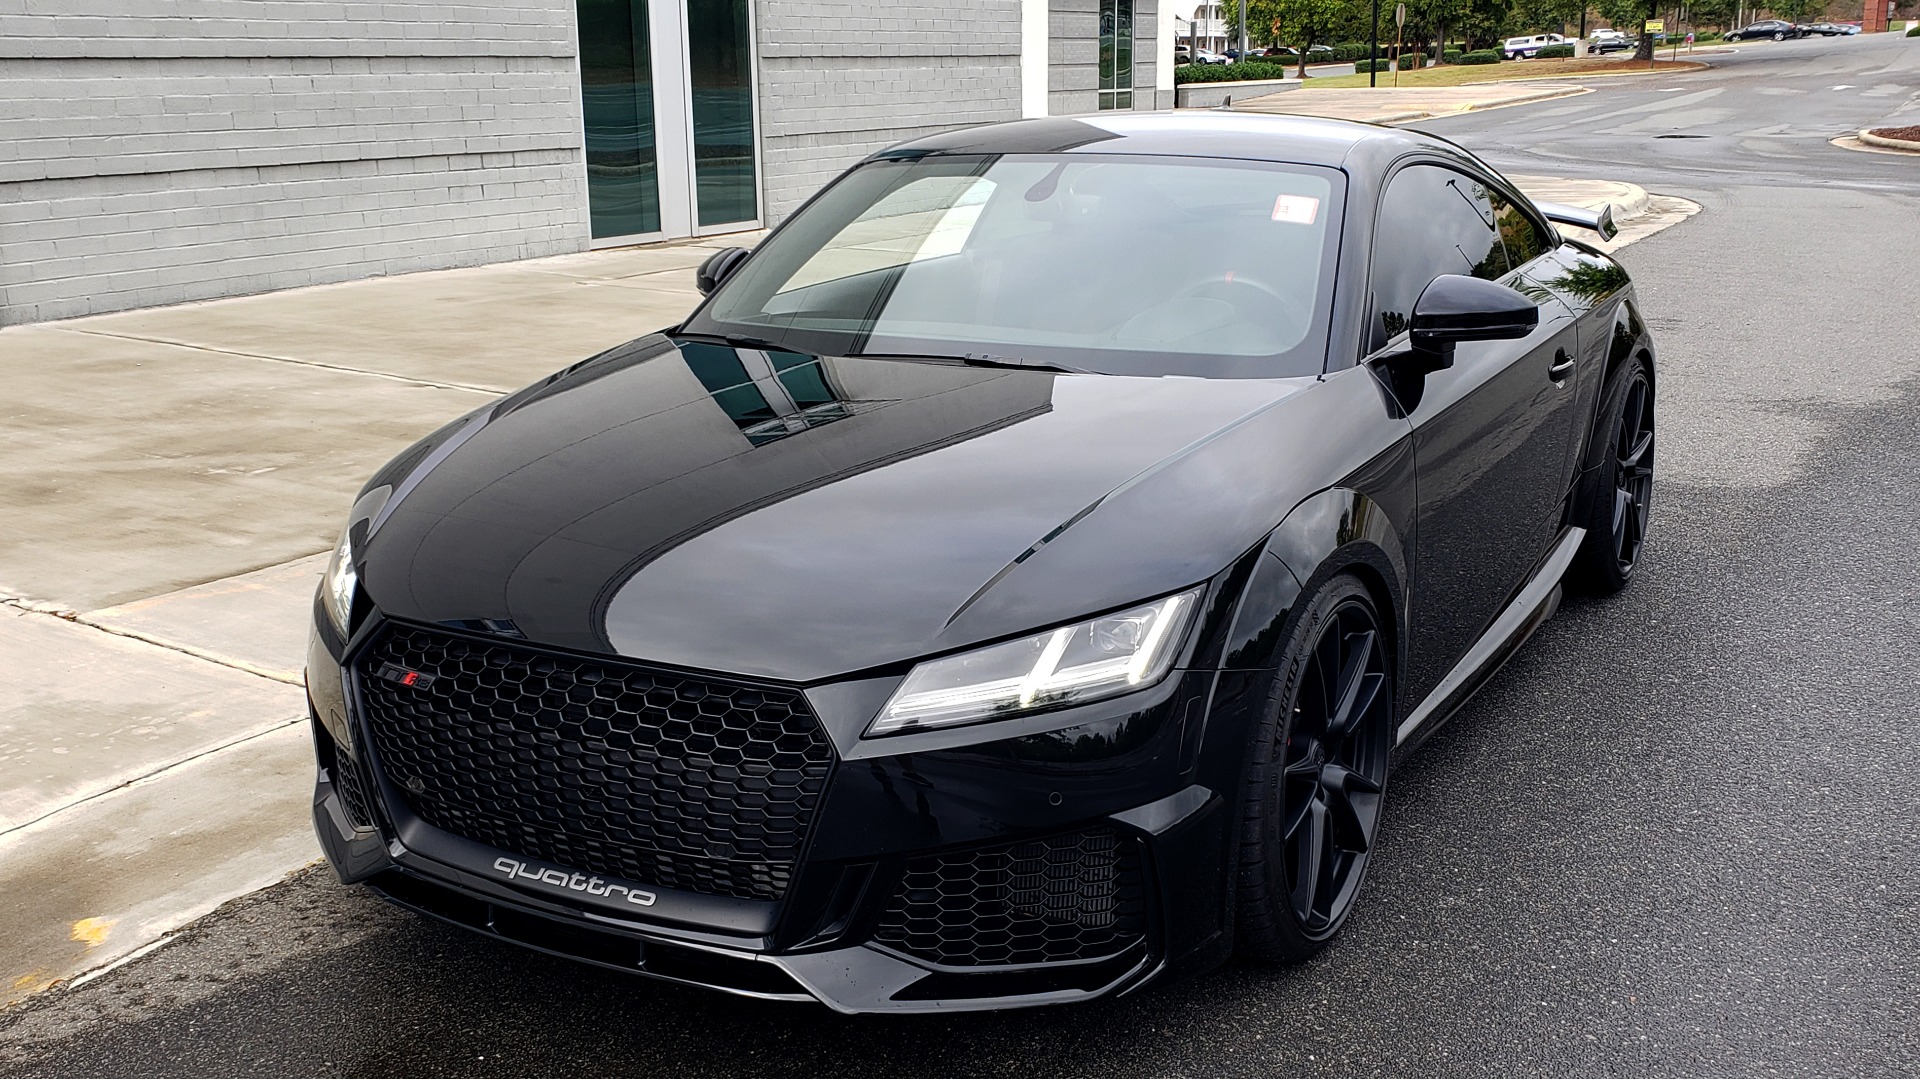 Used 2019 Audi TT RS 2.5L / QUATTRO / RS DESIGN / TECH / DYNAMIC / BLACK OPTIC / CARB for sale Sold at Formula Imports in Charlotte NC 28227 4